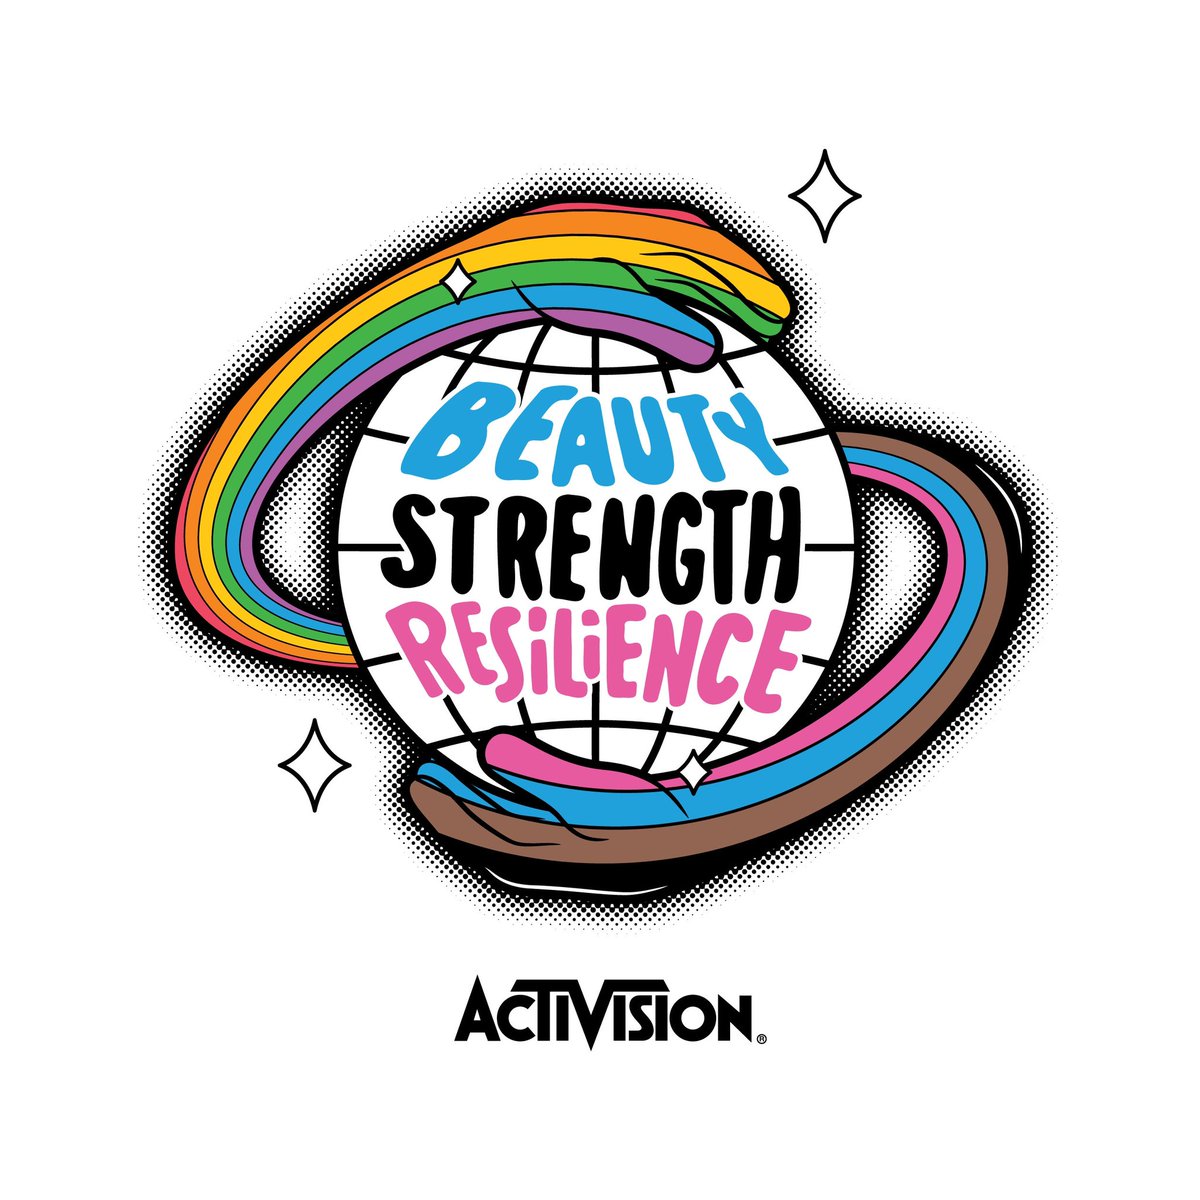 Join us in celebrating the power of #Pride 🌈

Activision is excited to be a part of the Los Angeles, Pride Parade on June 11th.

If you see our float during the parade route, be sure to say hello and share your own stories of pride and acceptance. See you there! 🏳️‍🌈